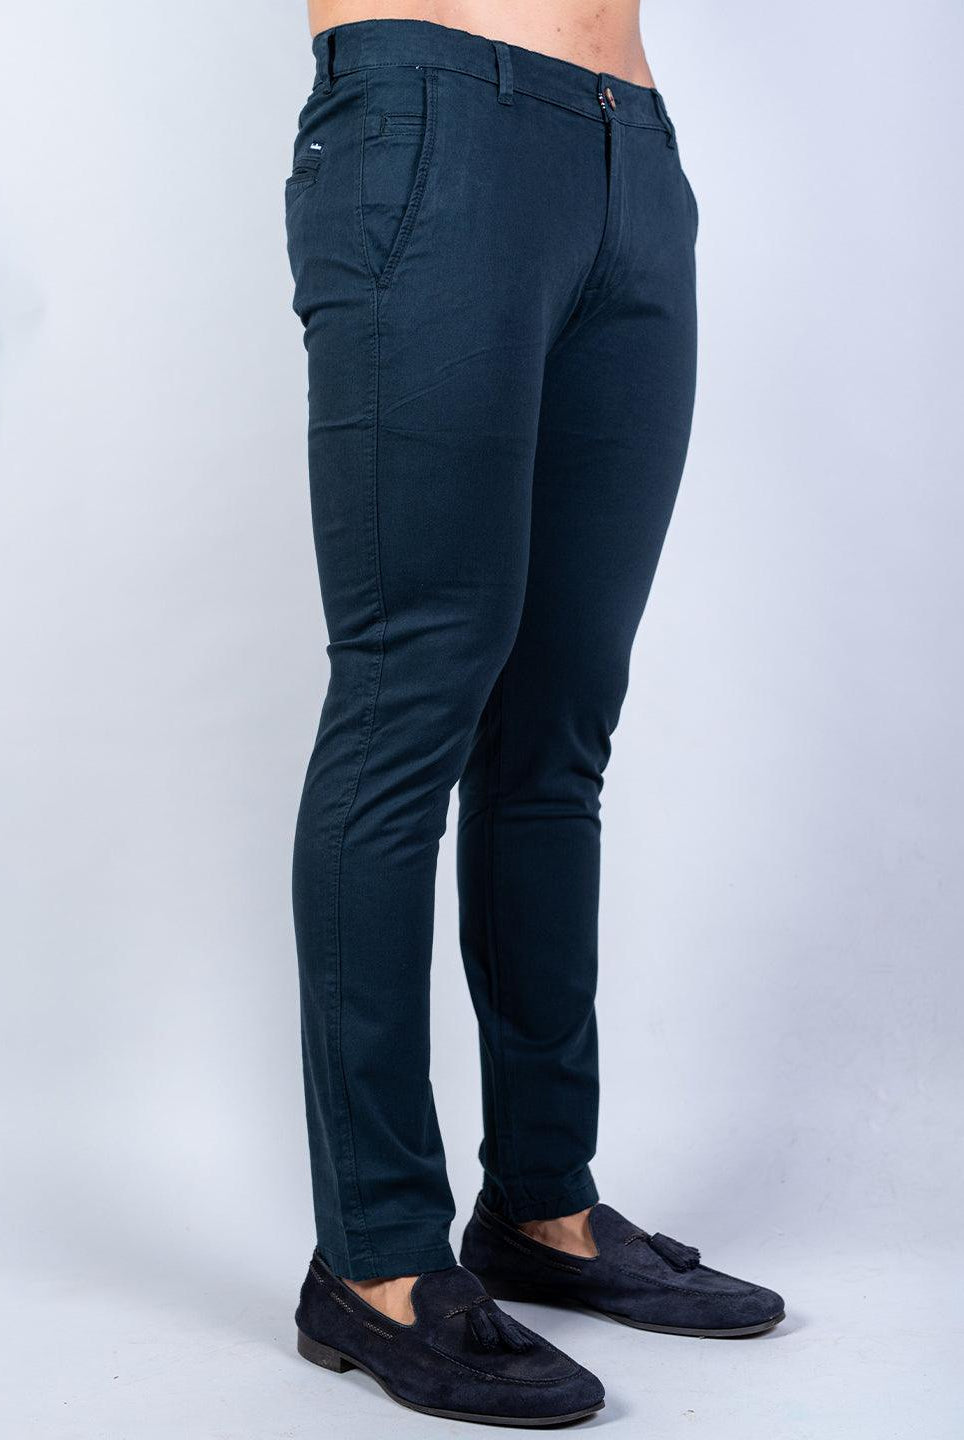 Navy Blue Solid Cotton Twill Trouser - Tistabene